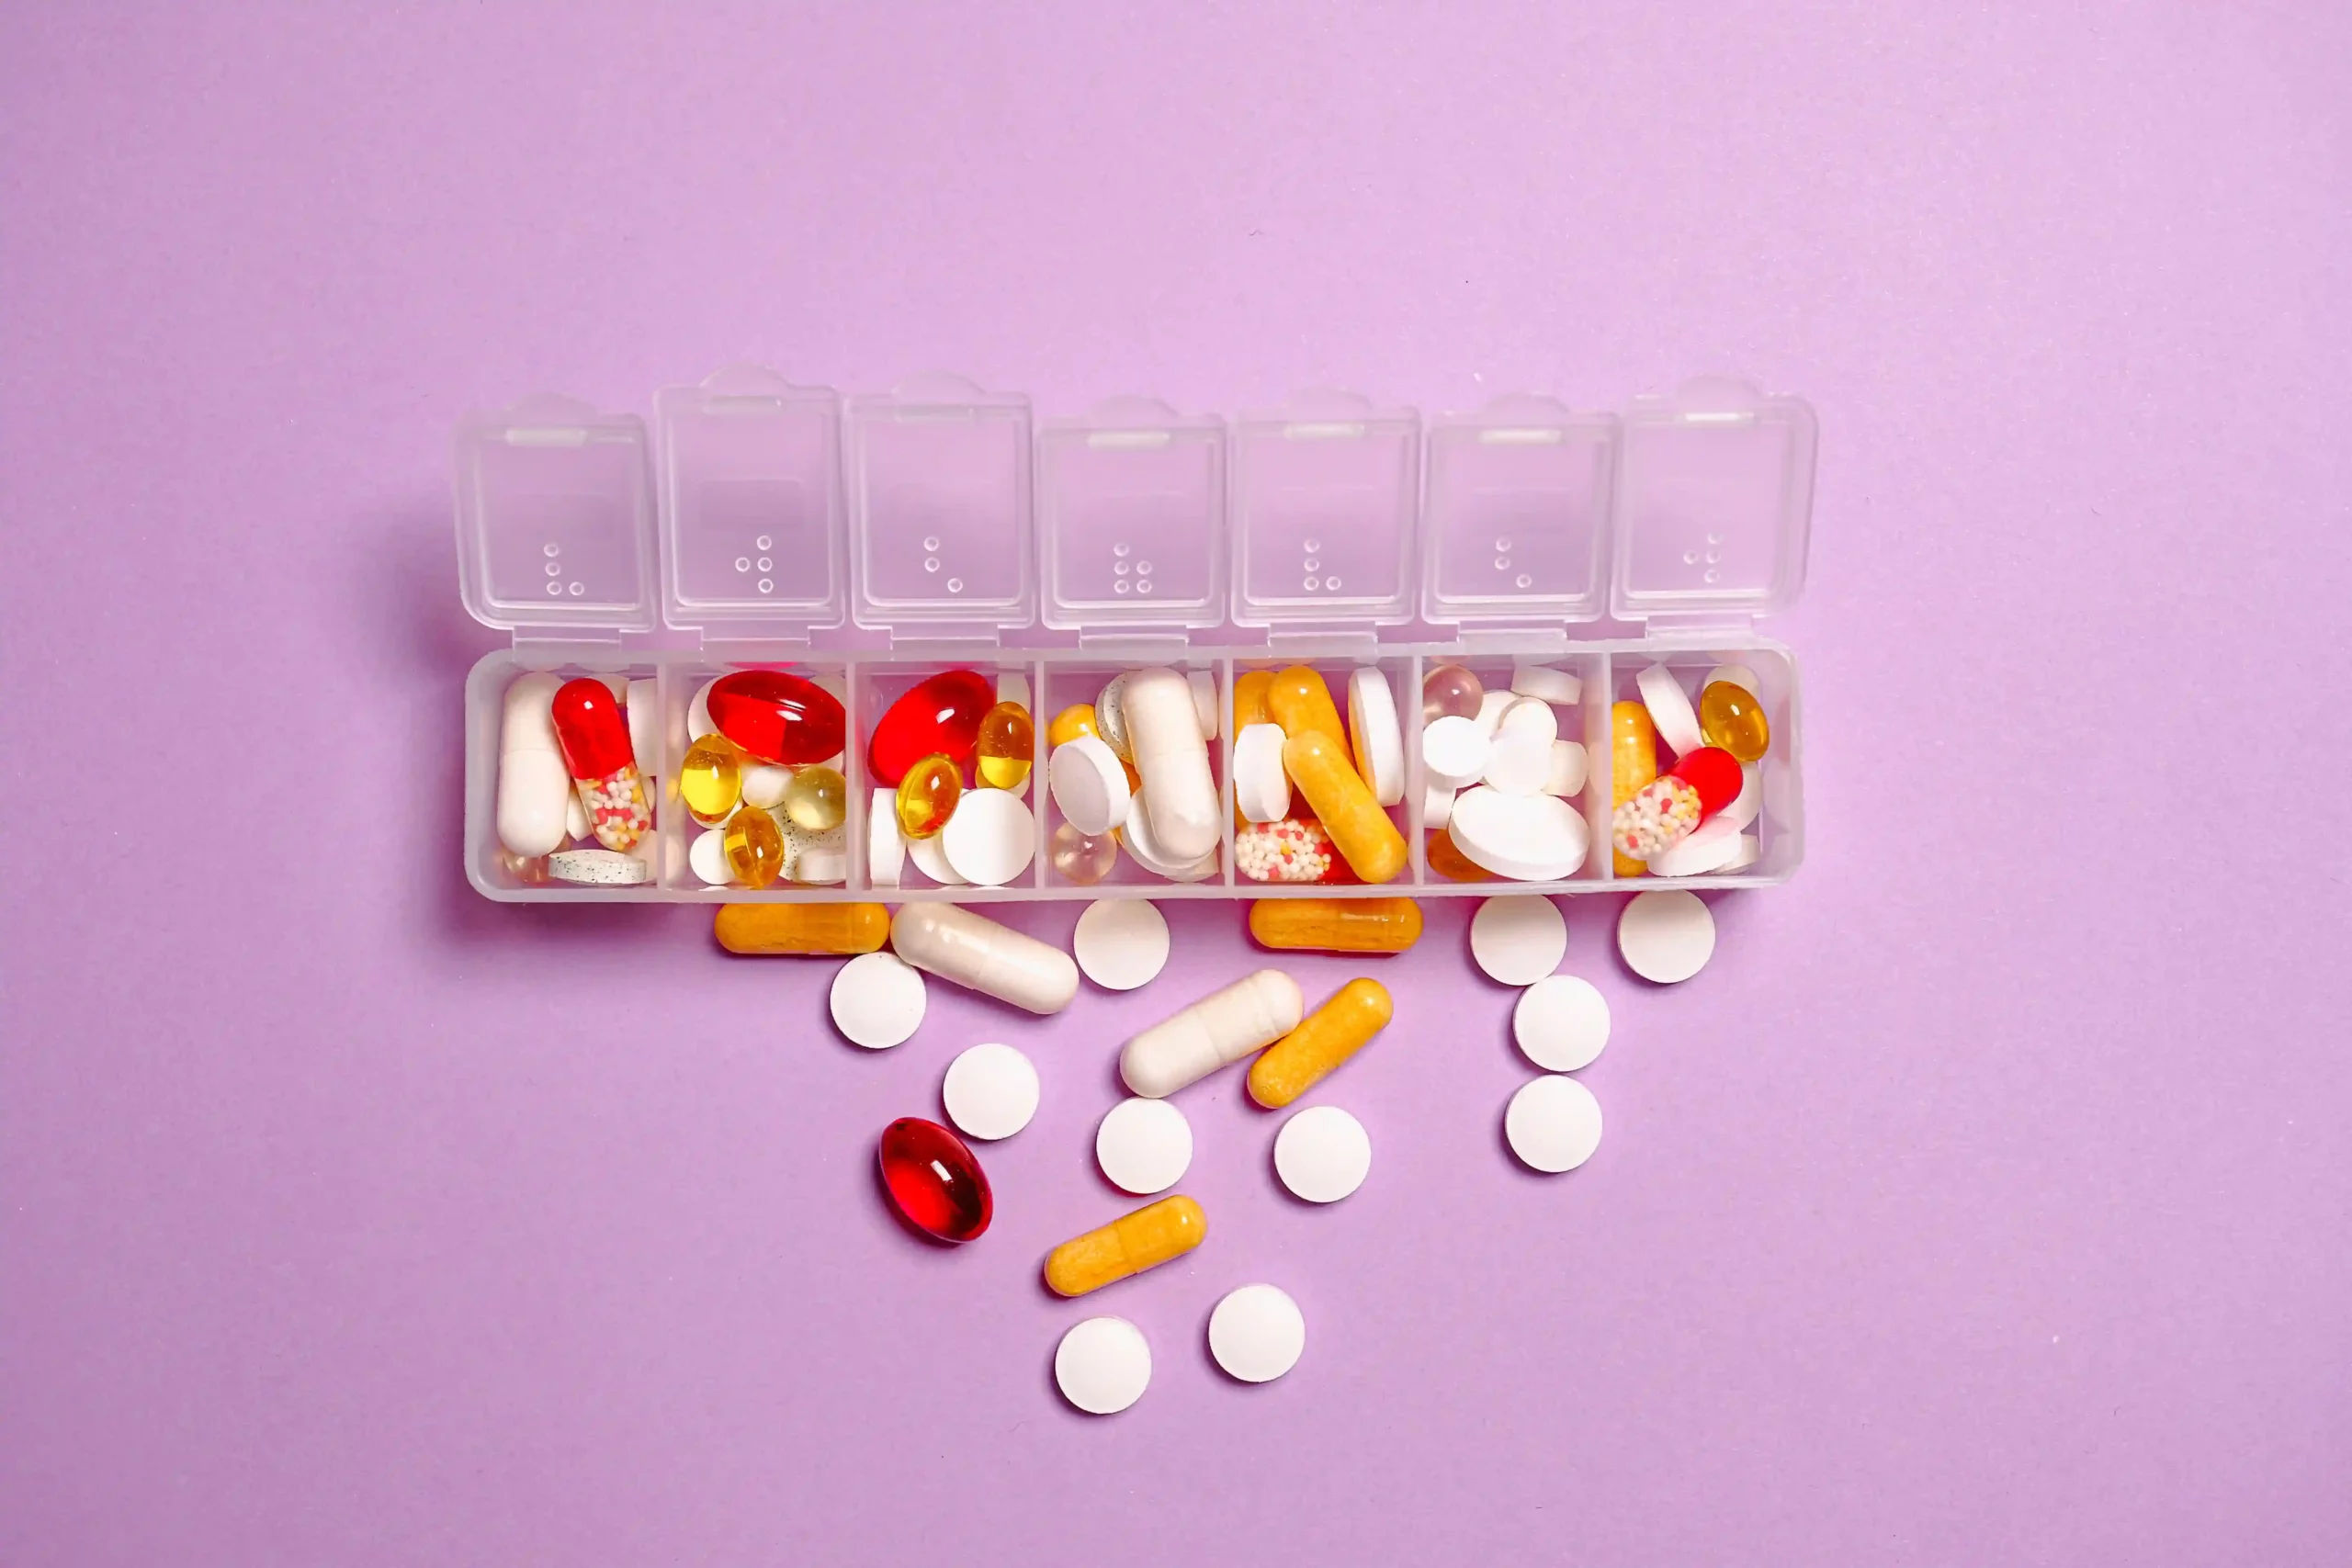 Can You Take Vitamins Without a Doctor's Prescription?